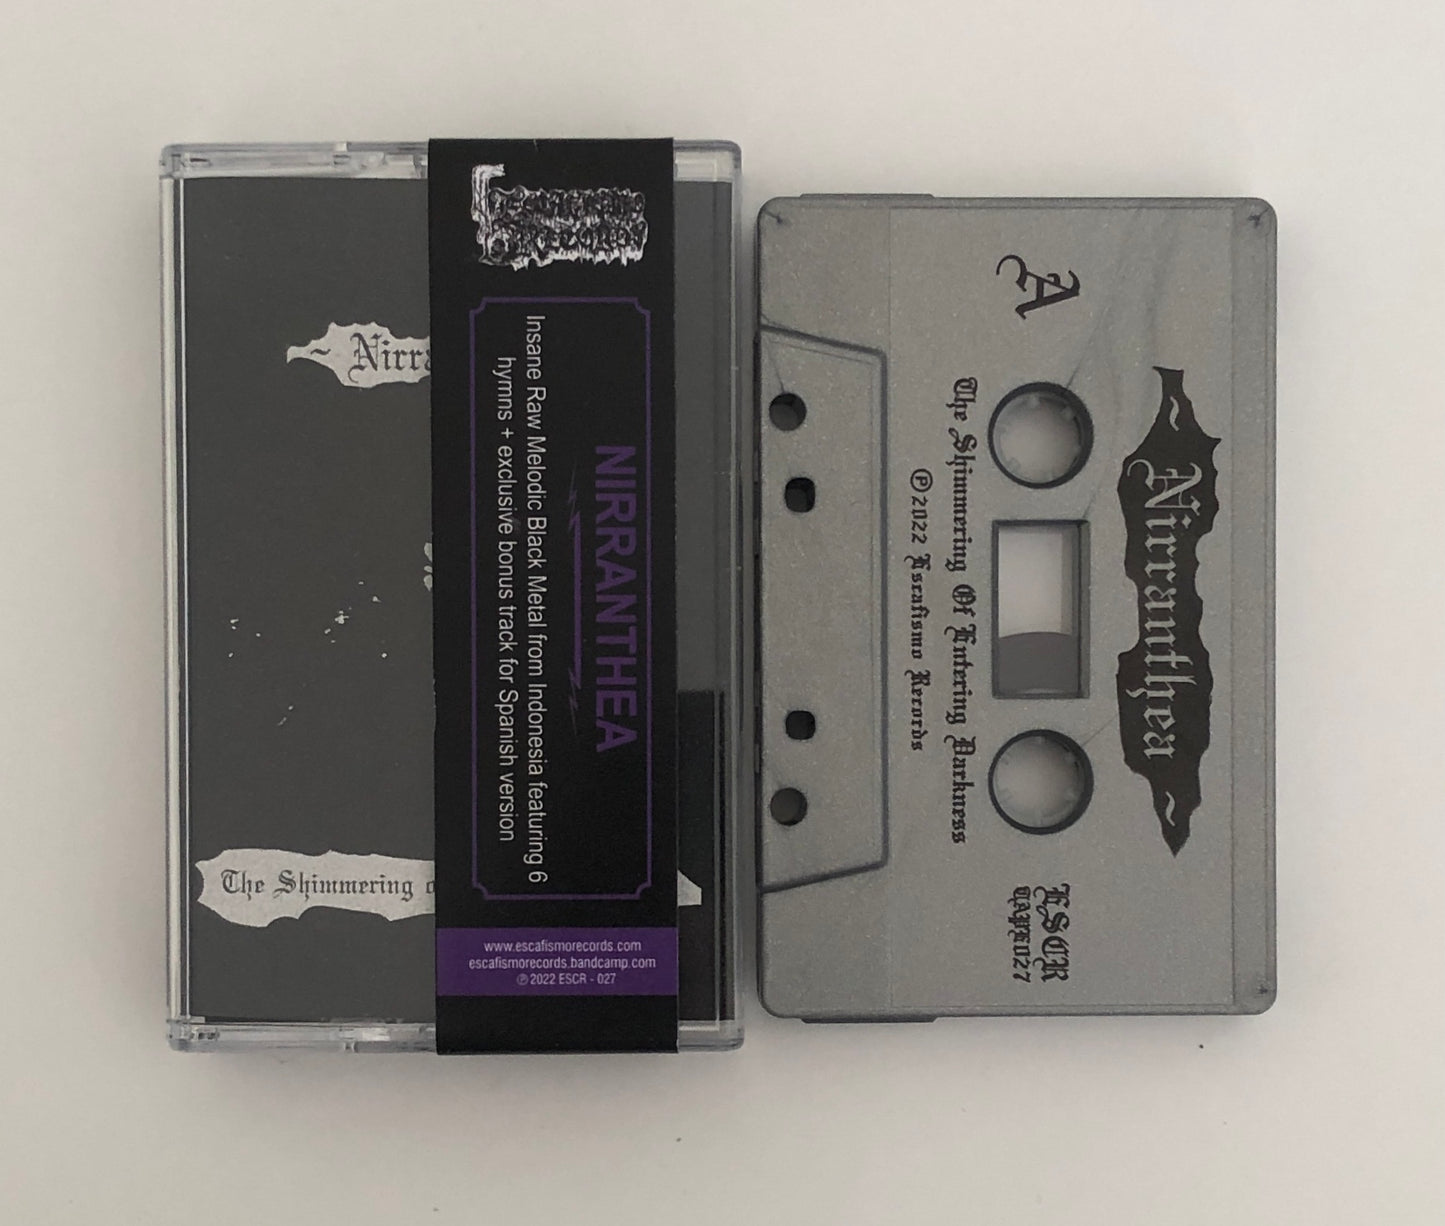 ESCR-027: Nirranthea (Id) "The Shimmering of Entering Darkness" - Pro tape